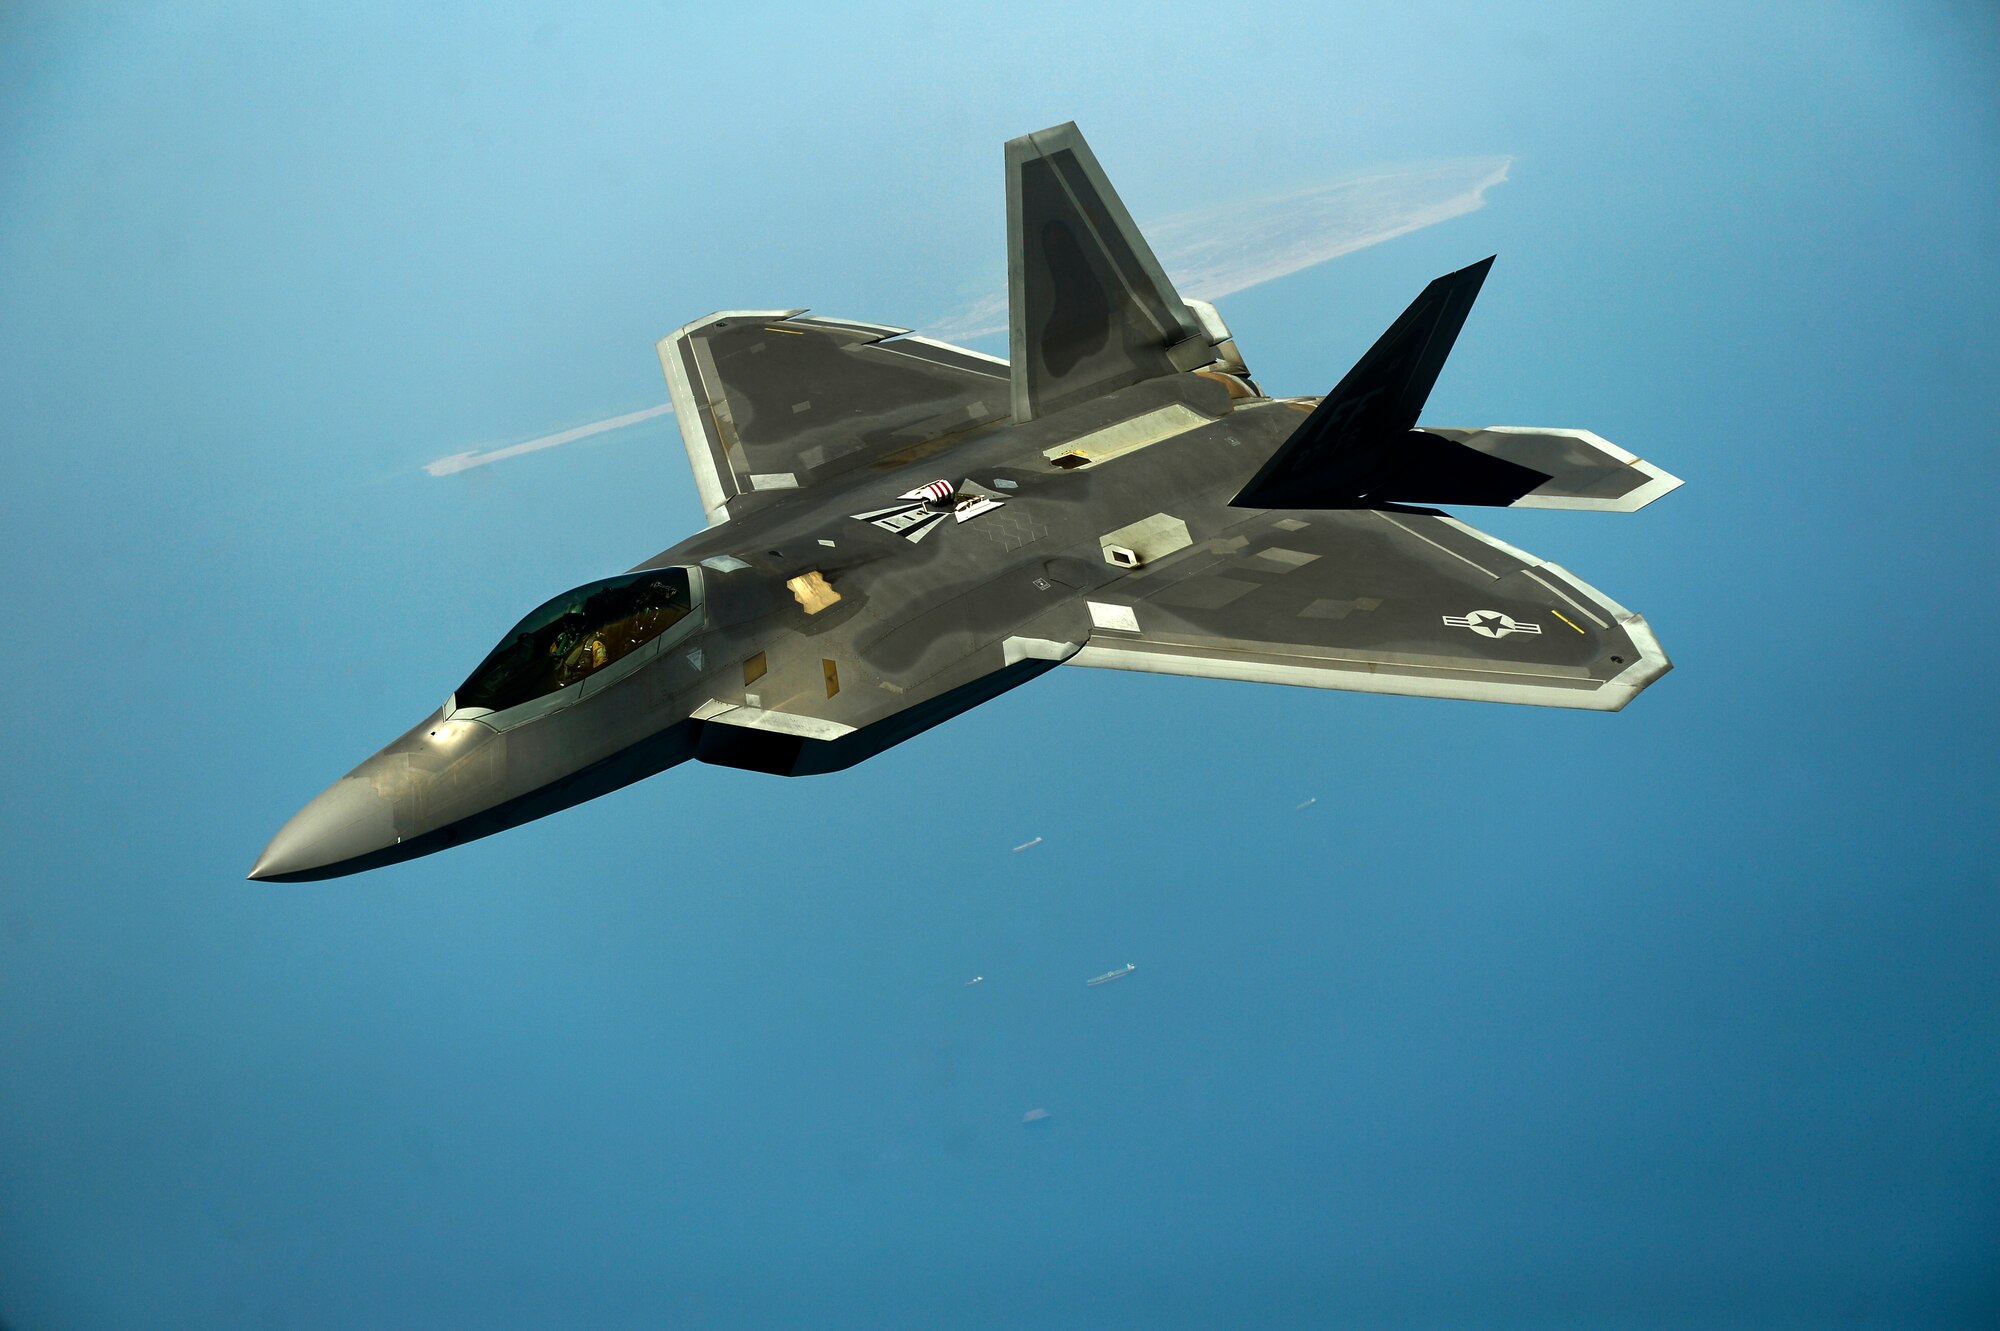 A U.S. Air Force F-22 maneuvers after being in-air refueled April 25, 2014, over the U.S. Central Command Area of responsibility by a KC-135 Stratotanker and aircrew from the 340th Expeditionary Air Refueling Squadron, Al Udeid Air Base, Qatar. The F-22 Raptor is an advanced capability aircraft that can be provided to the Combined Forces Air Component Commander within the region to enhance missions supporting stability and security. (U.S. Air Force photo by Staff Sgt. Vernon Young Jr./Released)